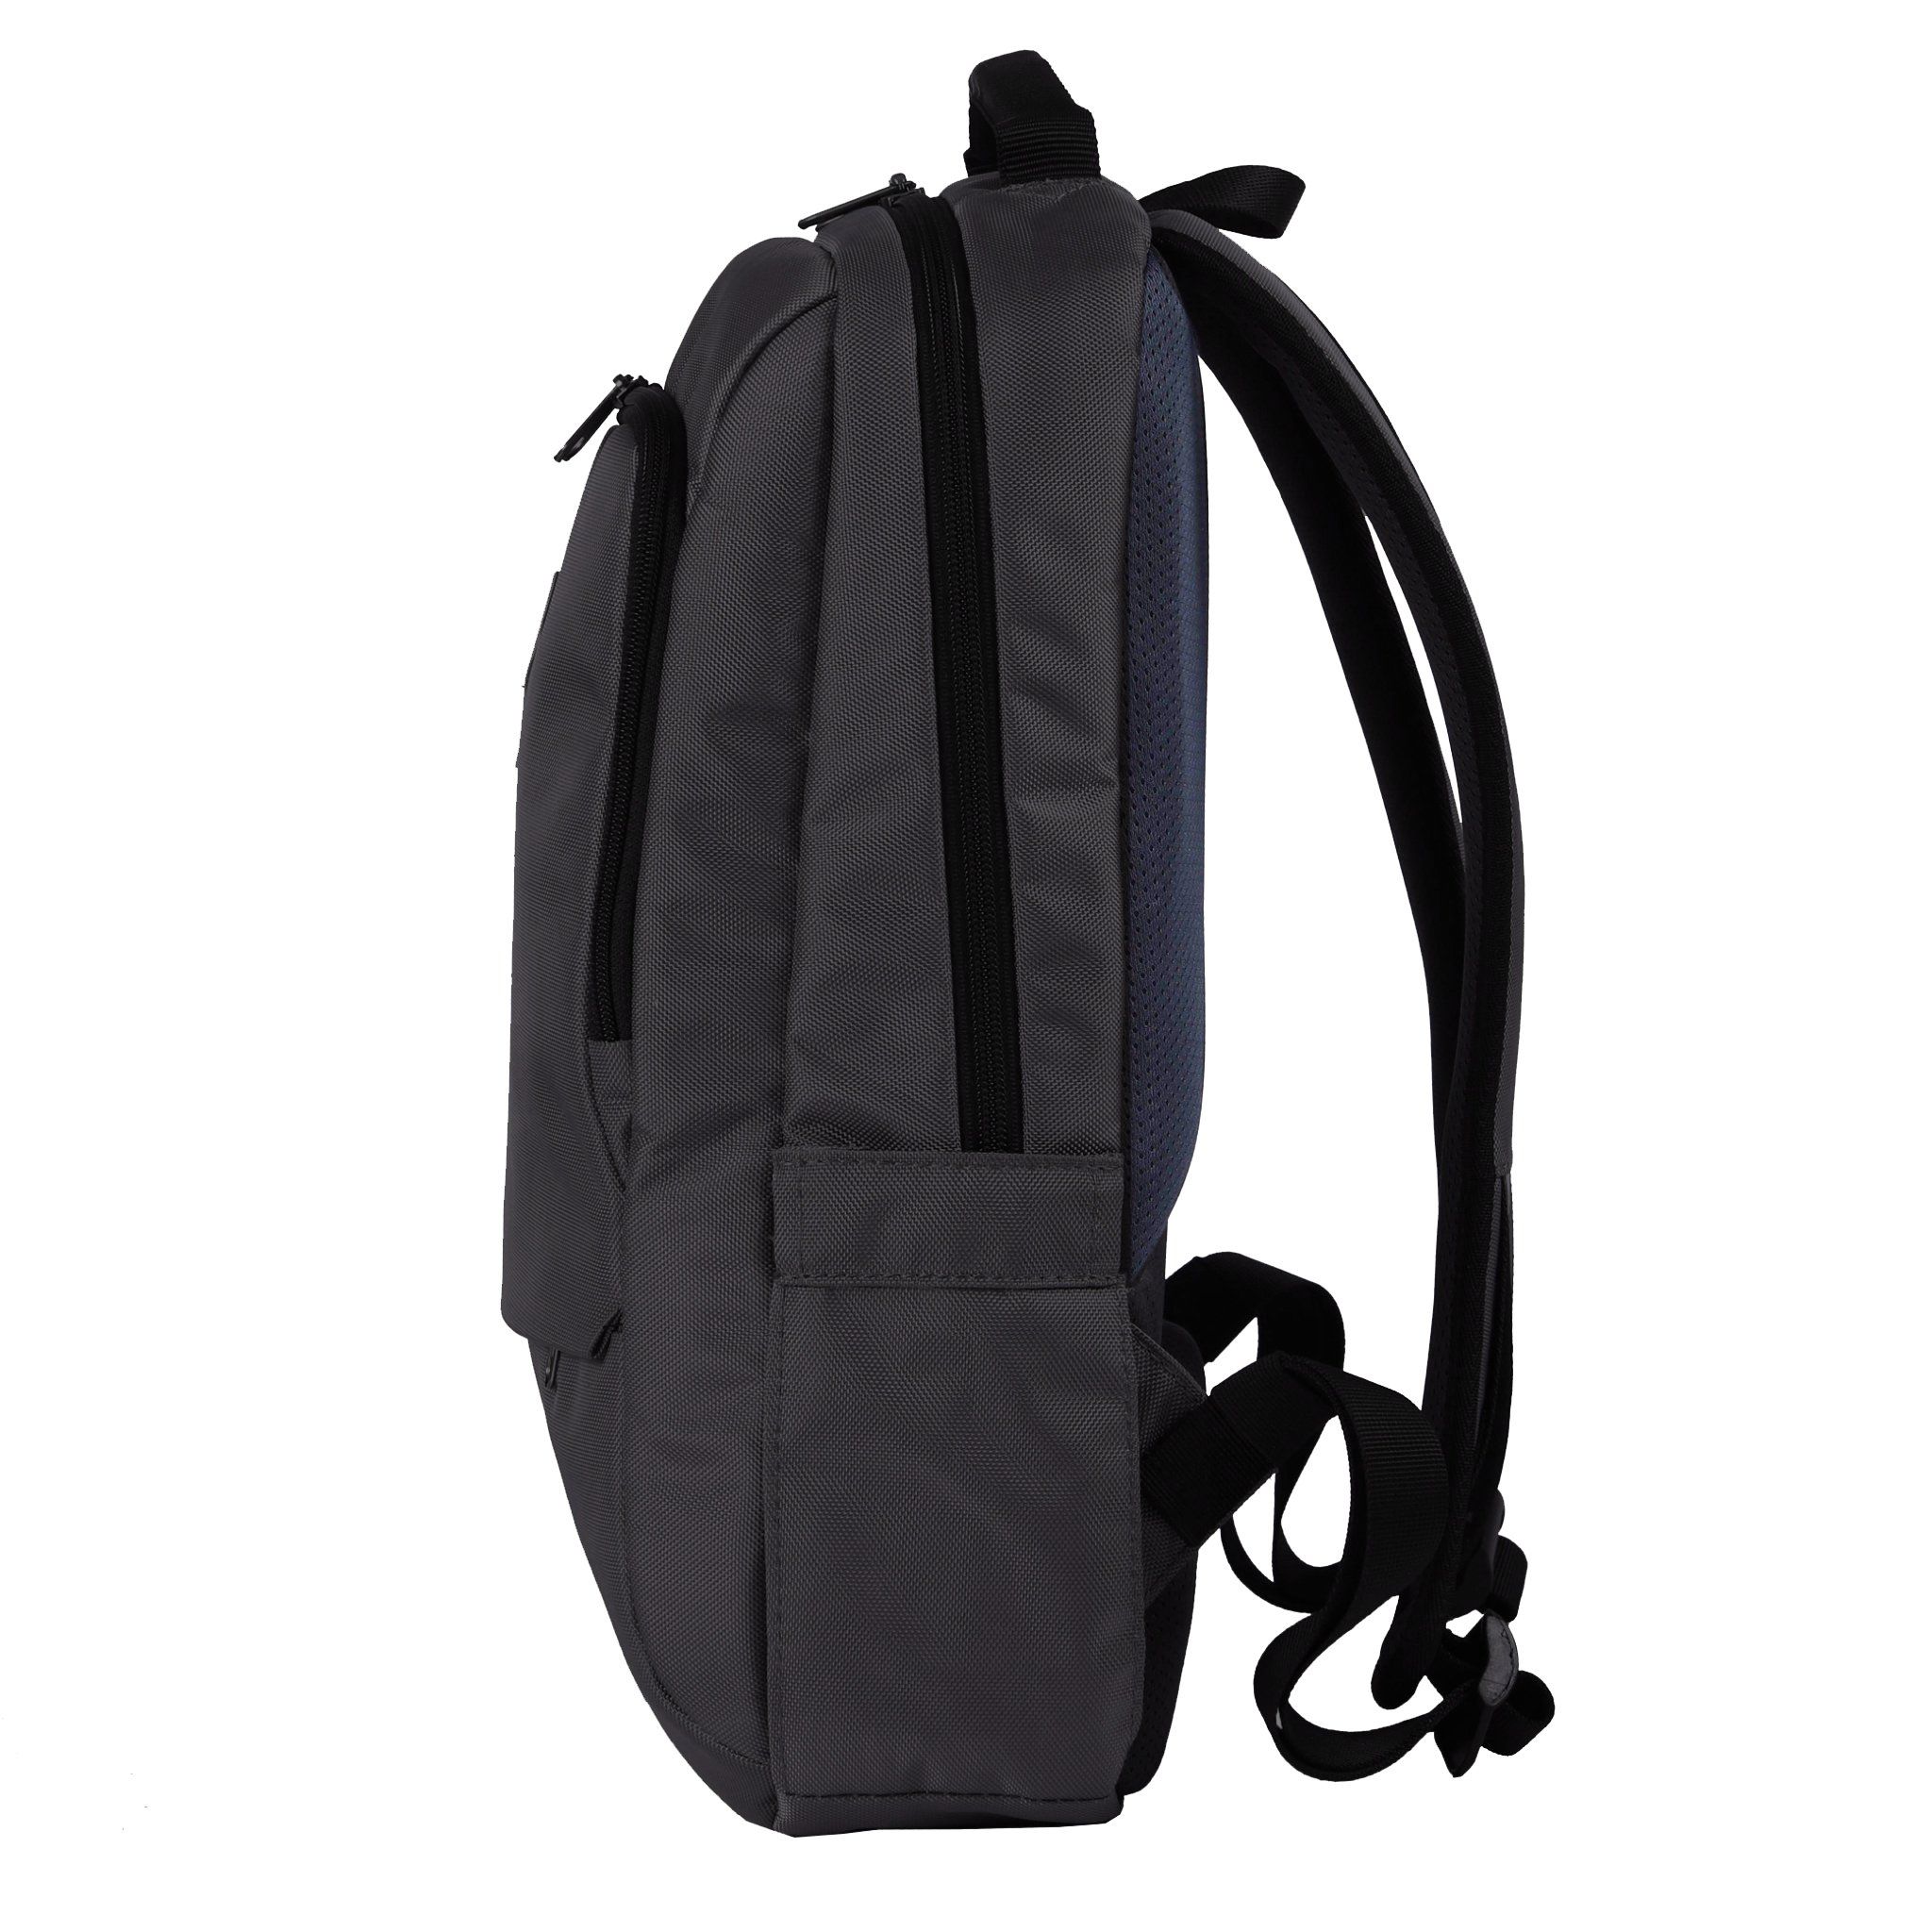  UMO TANO BackPack D.Grey- Balo Laptop Cao Cấp 